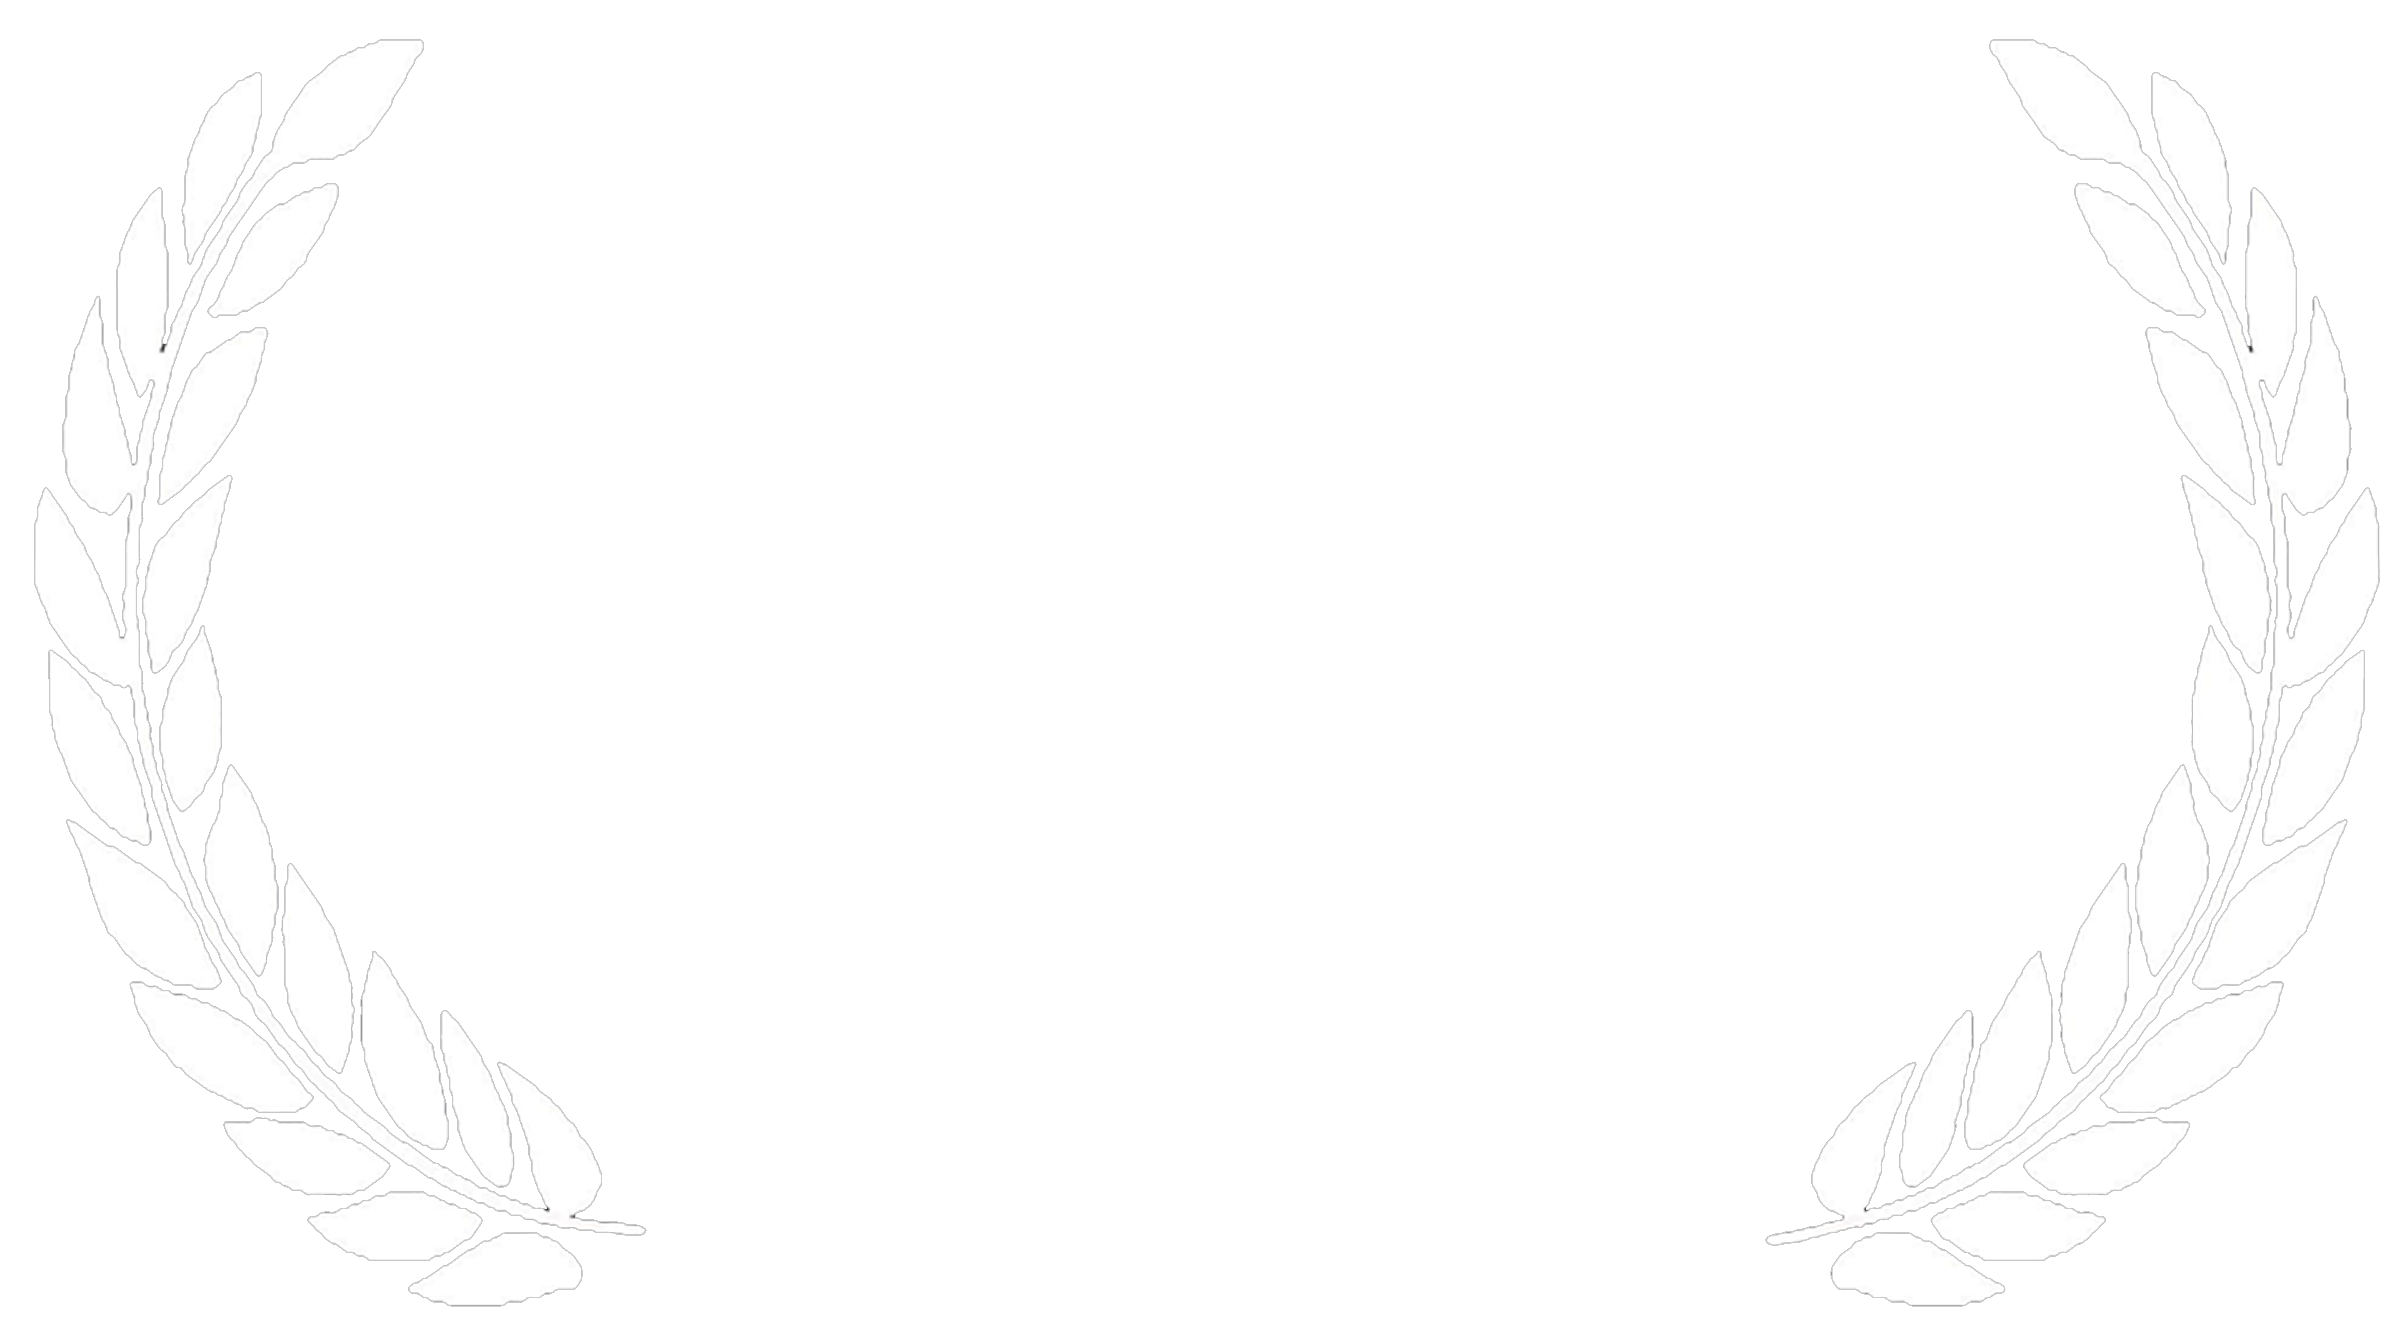 Best Experimental 2016 LACFH WHITE.png